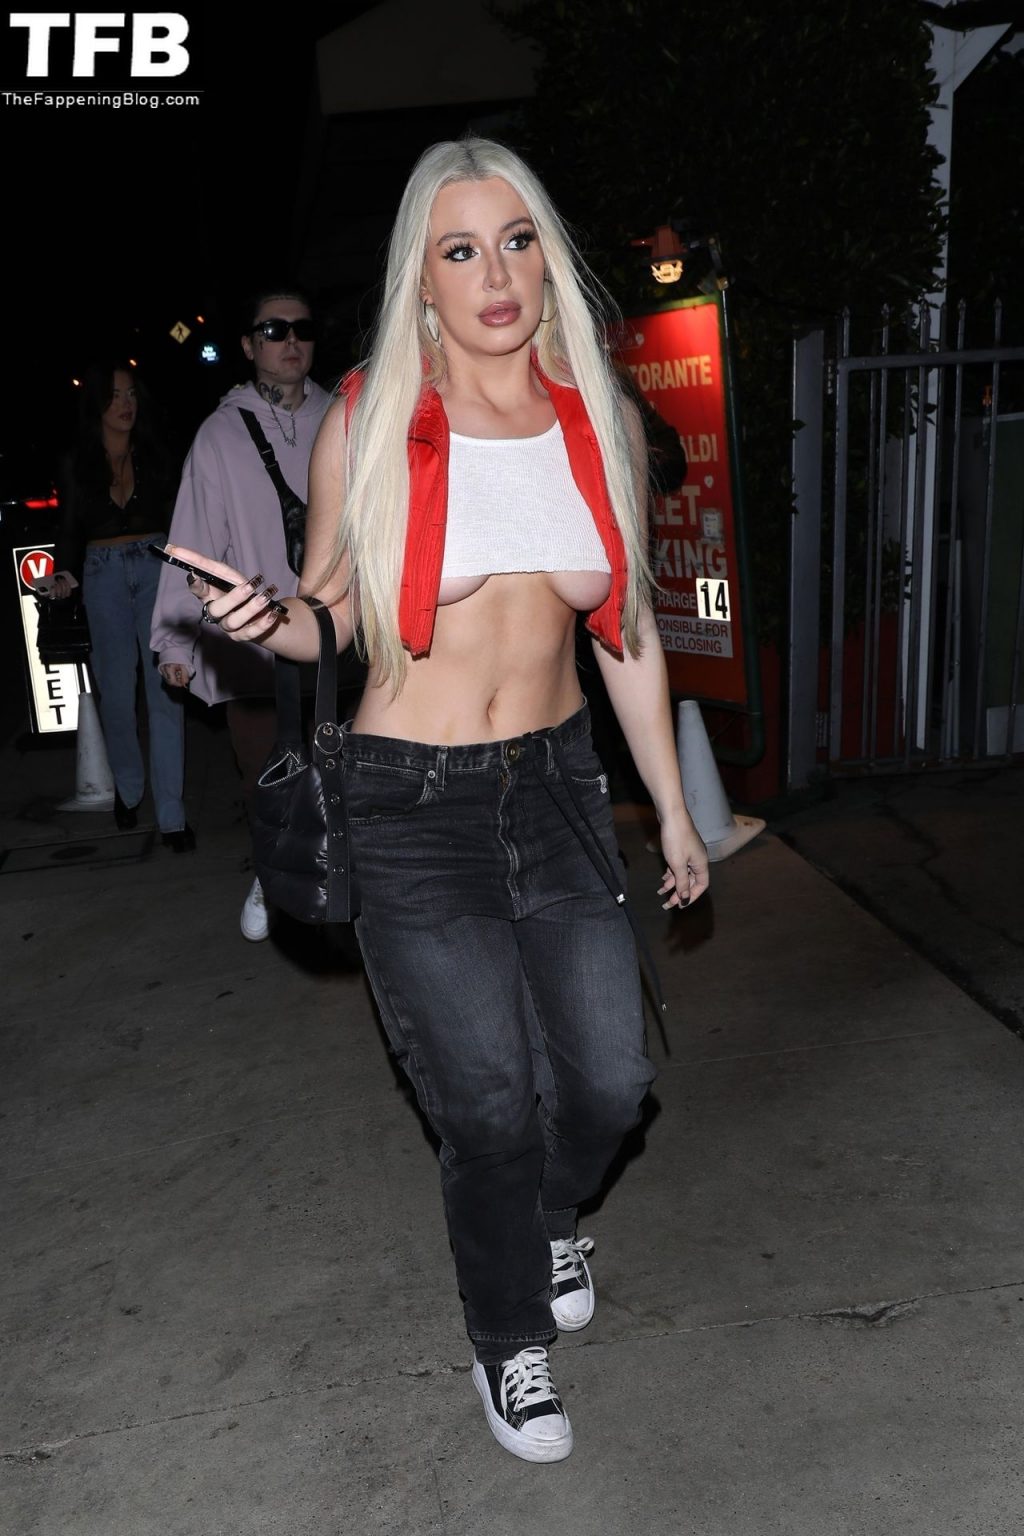 Tana Mongeau Shows Off Her Underboob as She Enjoys a Night Out in Santa Monica (18 Photos + Video)